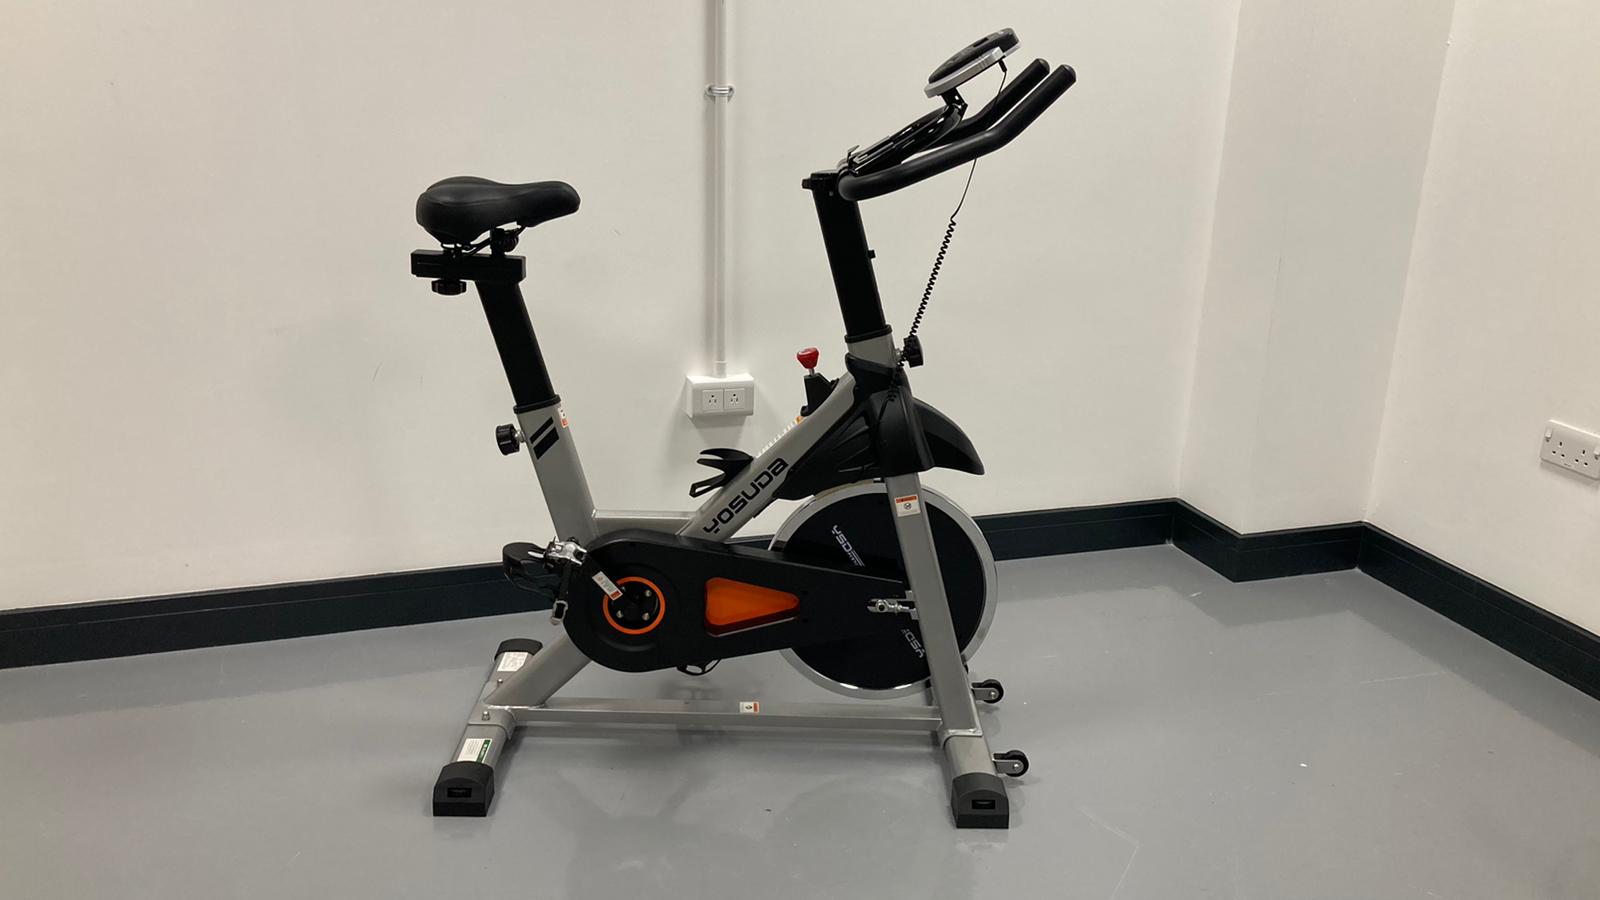 Yosuda Indoor Cycling Bike at Fit&Well testing centre